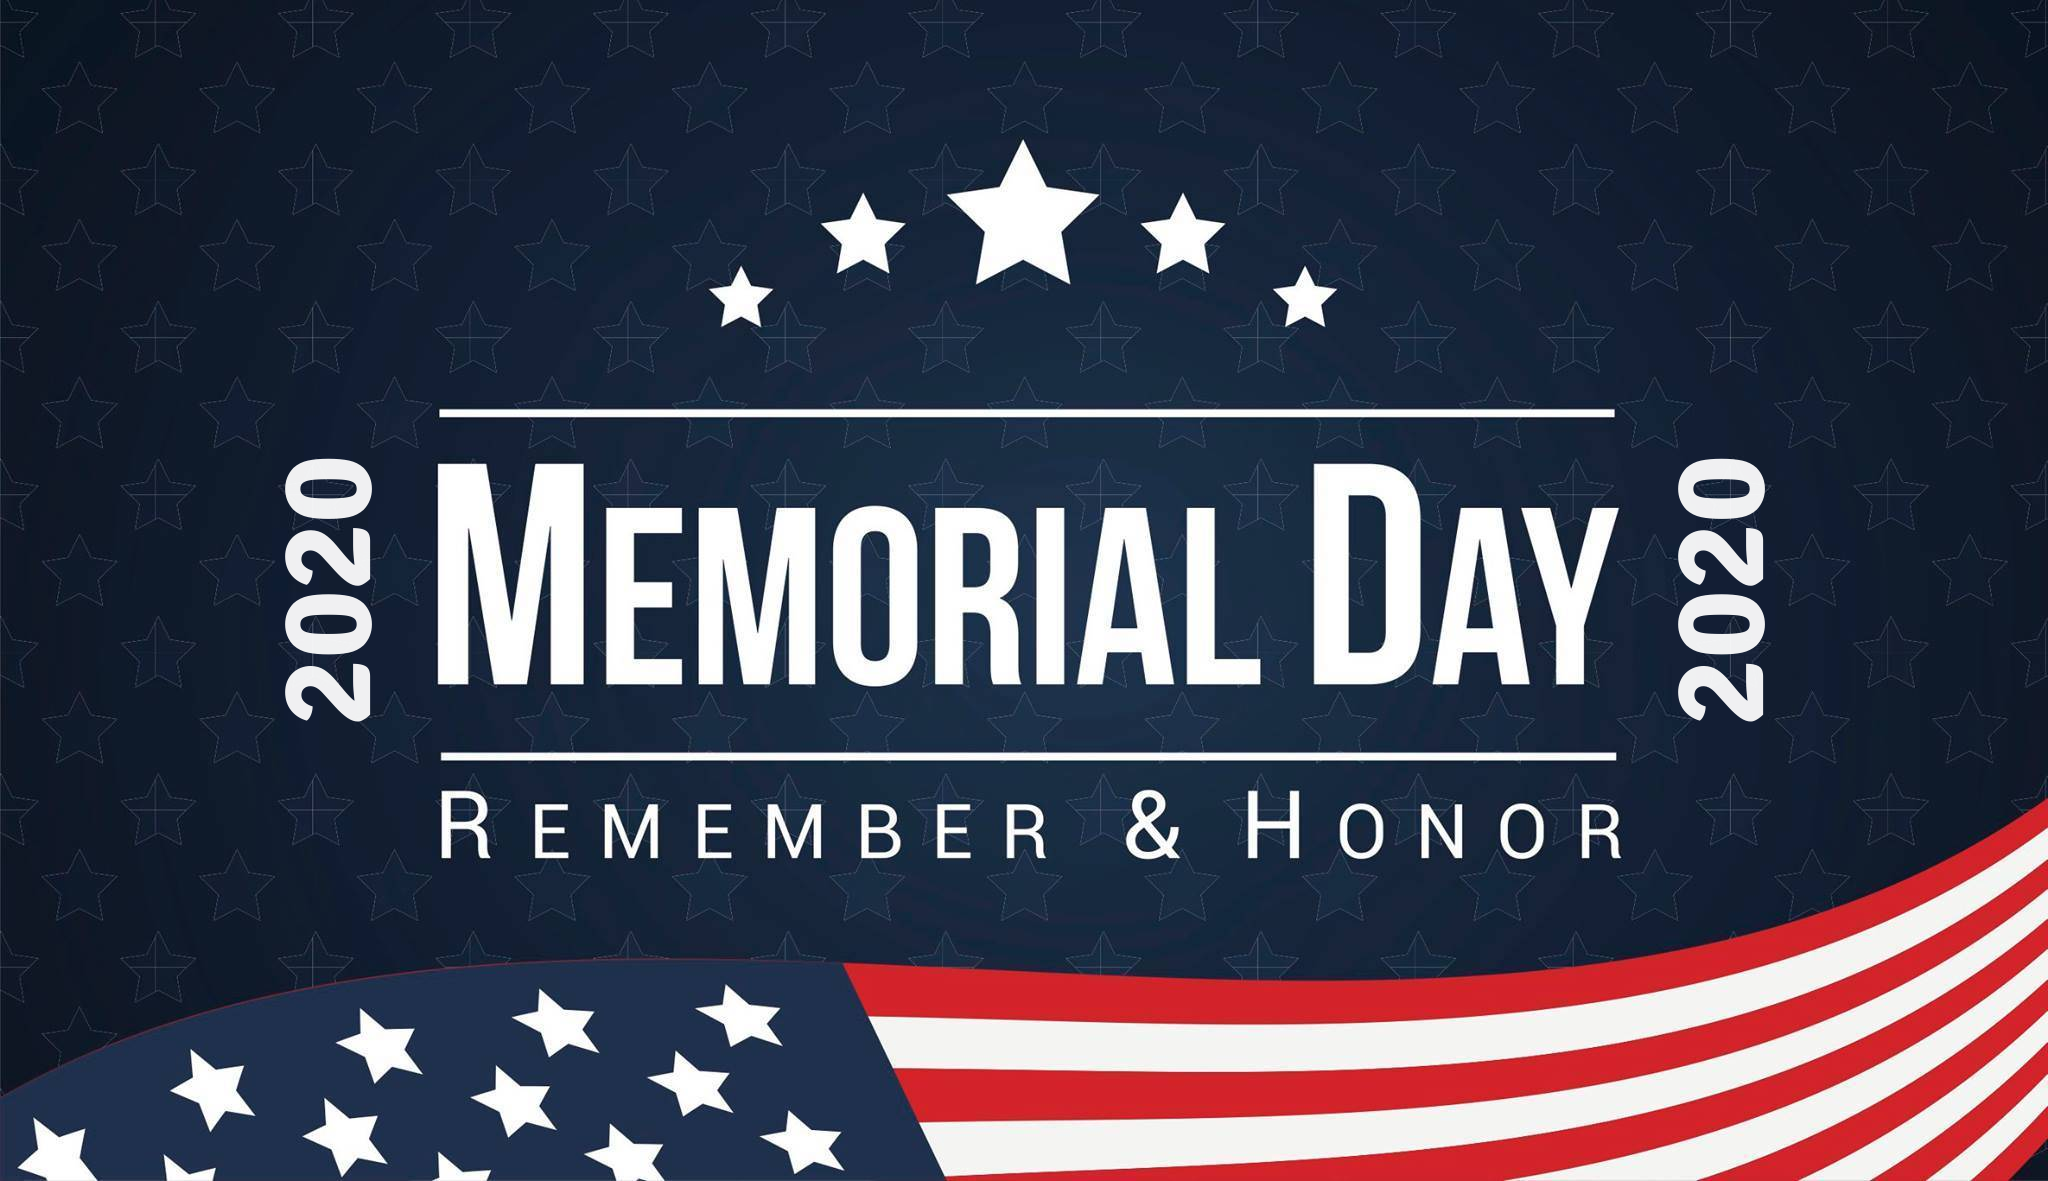 Memorial Day 2020 History, Quotes, Image, Wishes, Events, Parade